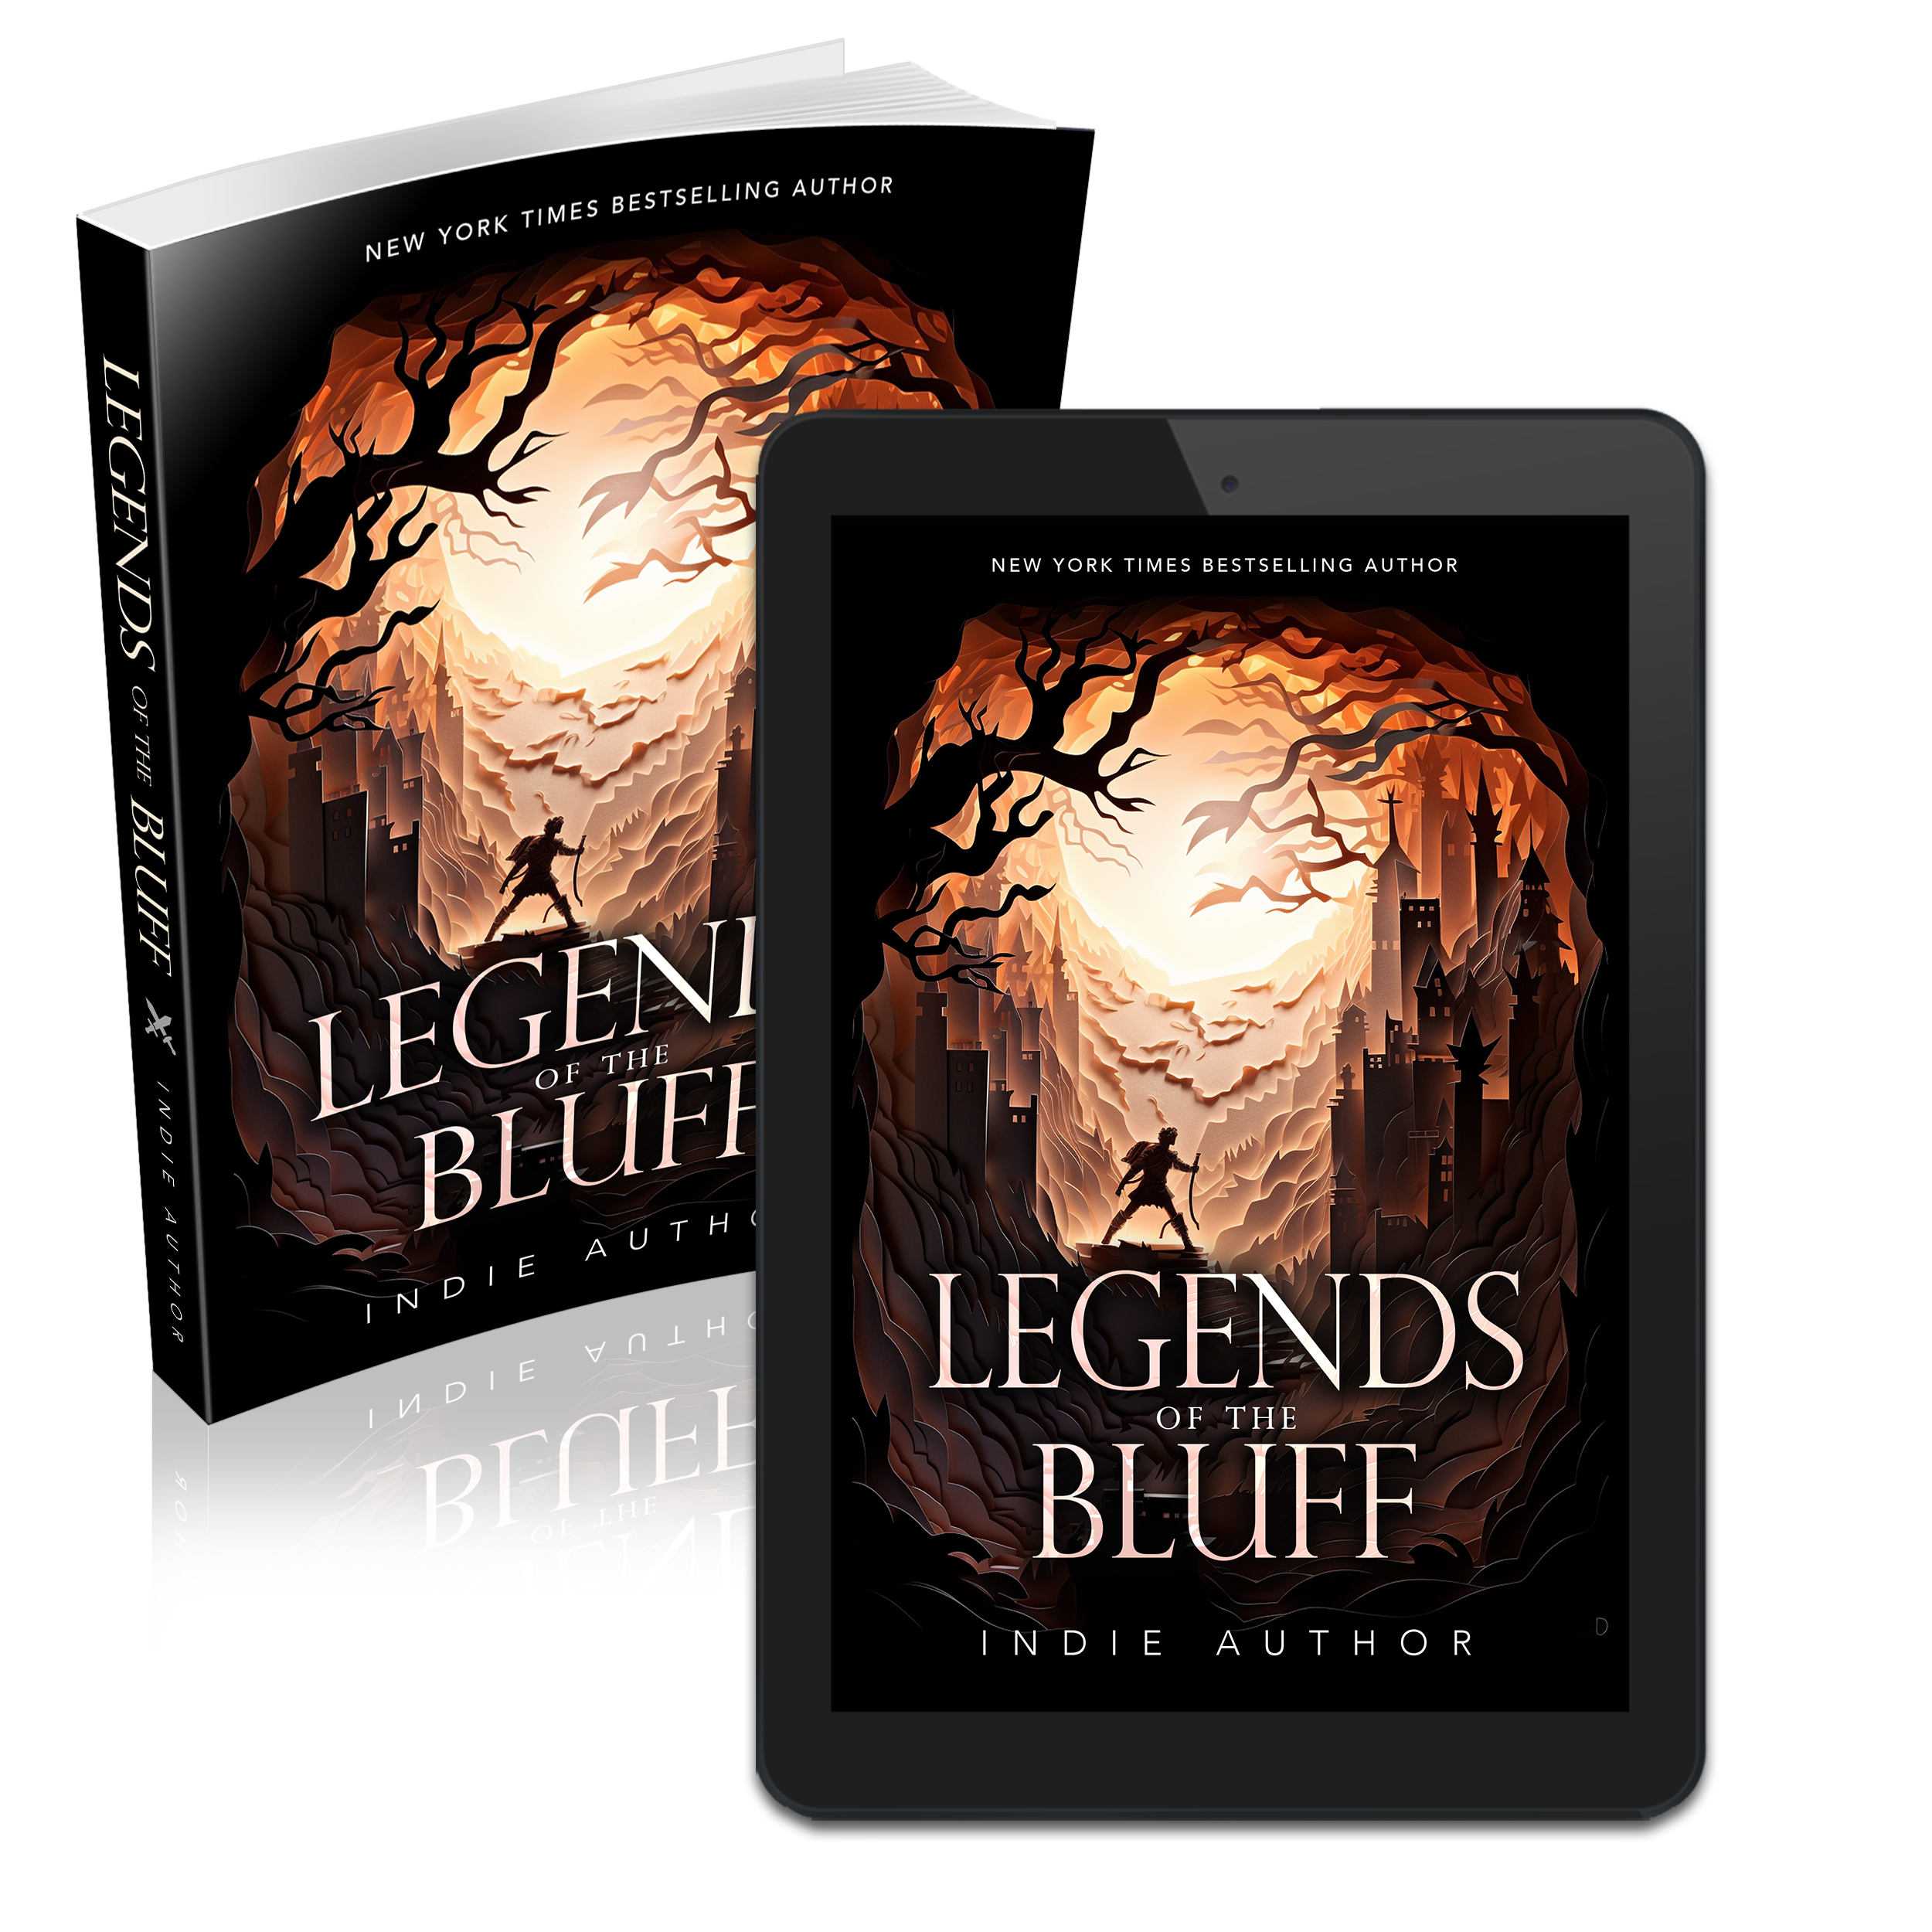 Legends of the Bluff premade cover